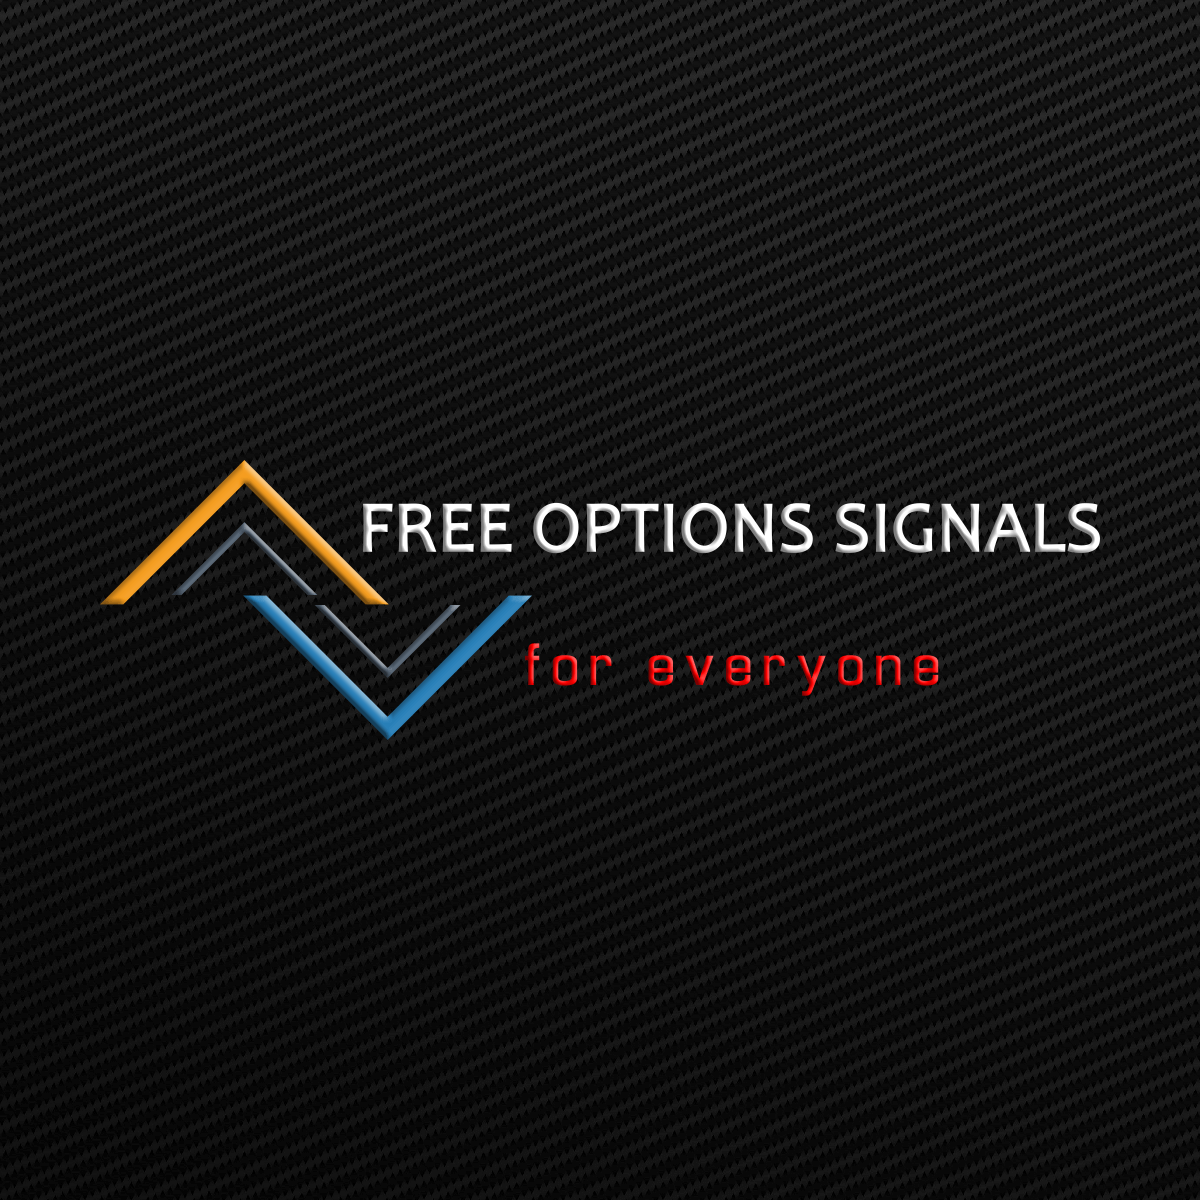 Binary options signals services